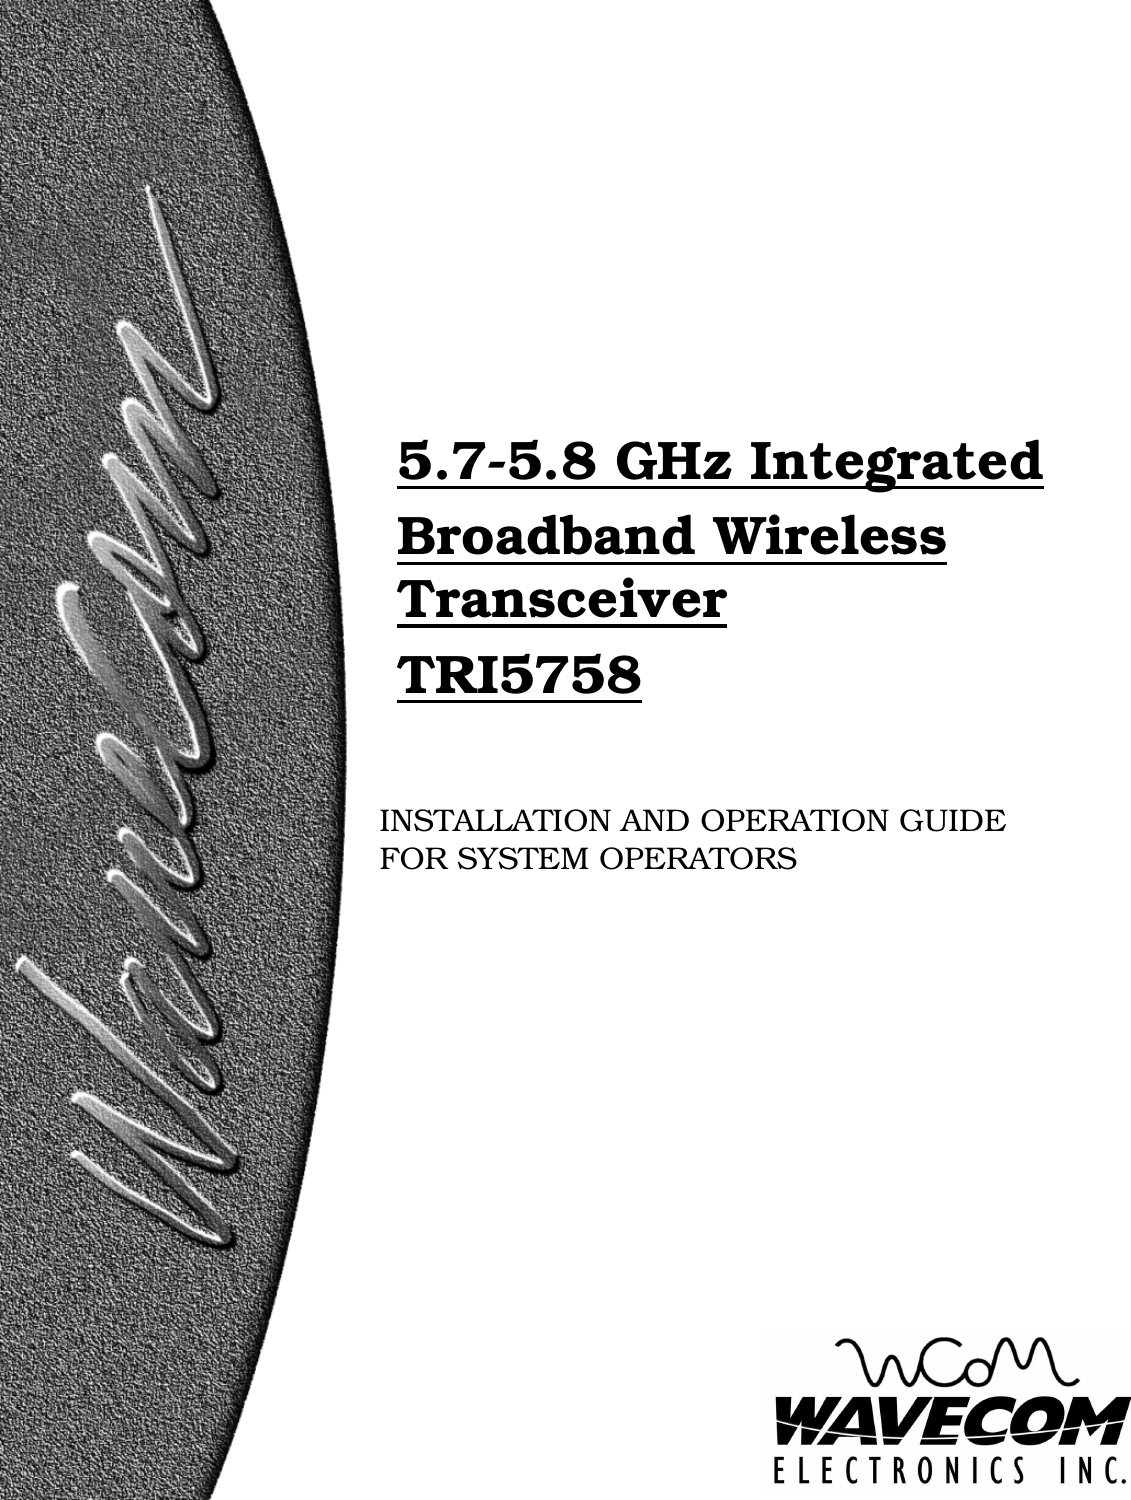    5.7-5.8 GHz Integrated Broadband Wireless Transceiver TRI5758   INSTALLATION AND OPERATION GUIDE FOR SYSTEM OPERATORS 